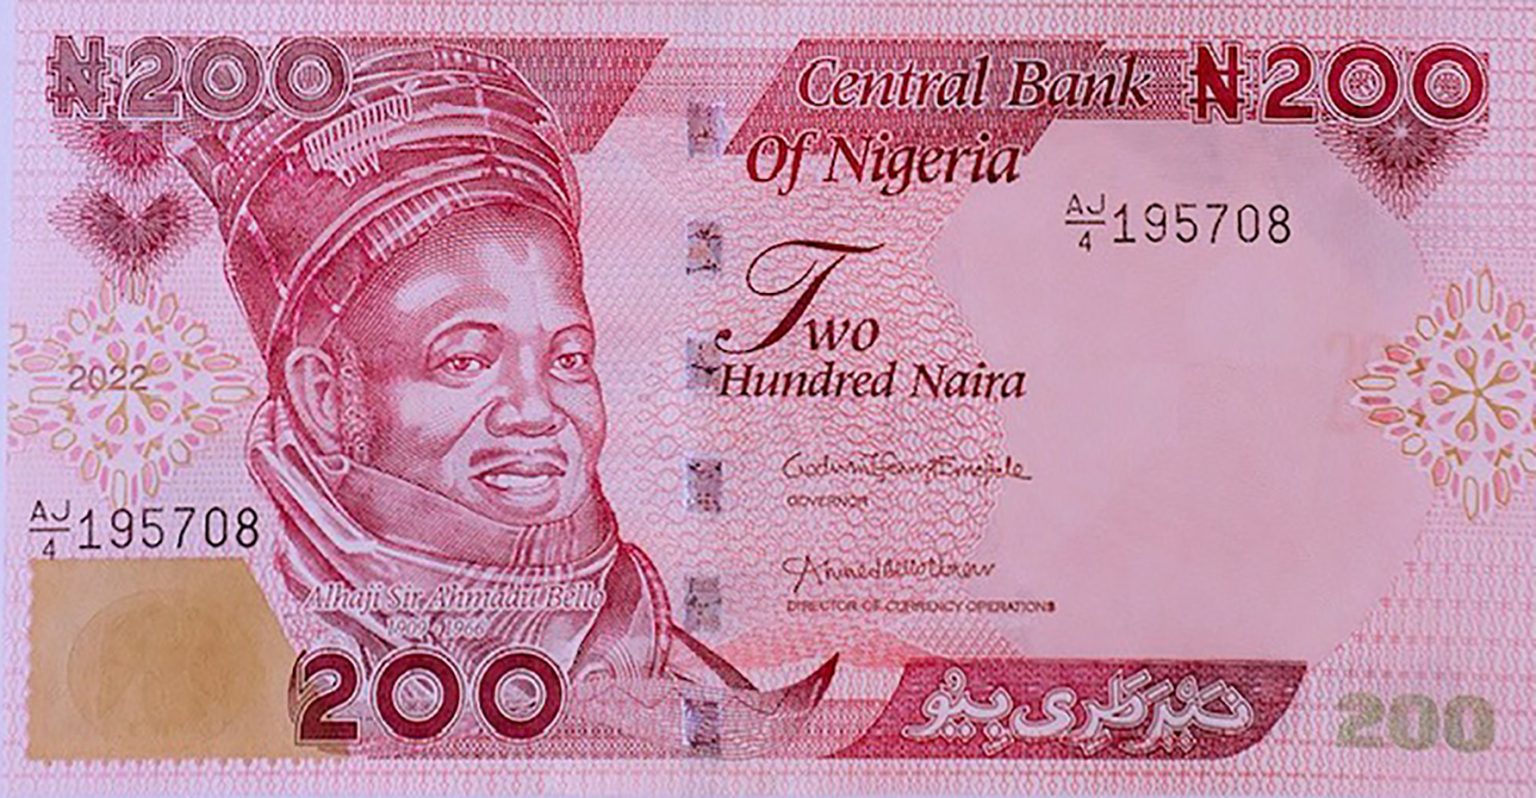 Nigeria new 200naira note (B244a) reported for introduction on 15.12.